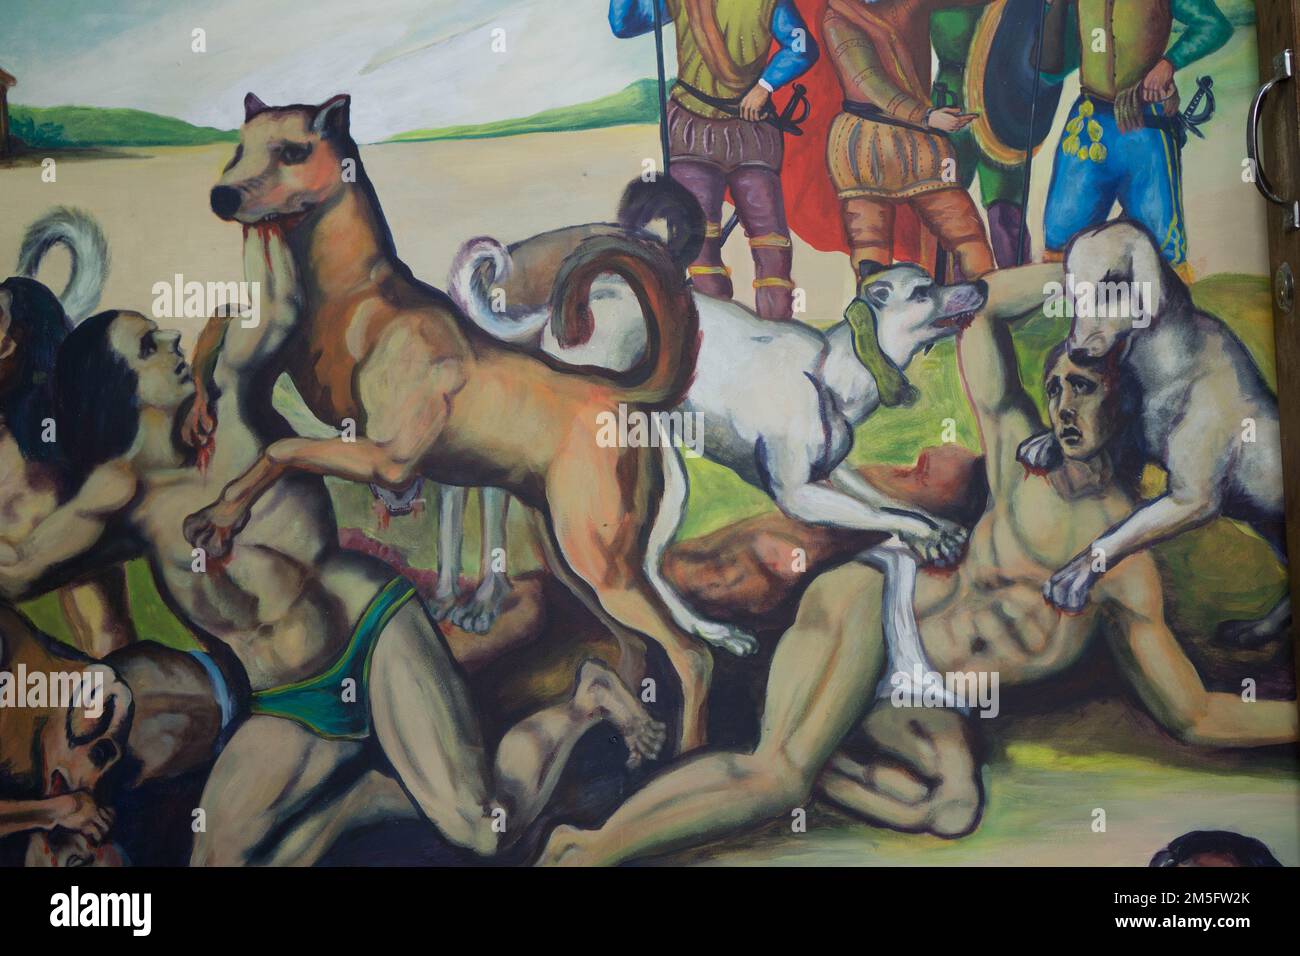 Mural of Spanish using dogs to attack Indigenous people in Boaco, Nicaragua. Stock Photo